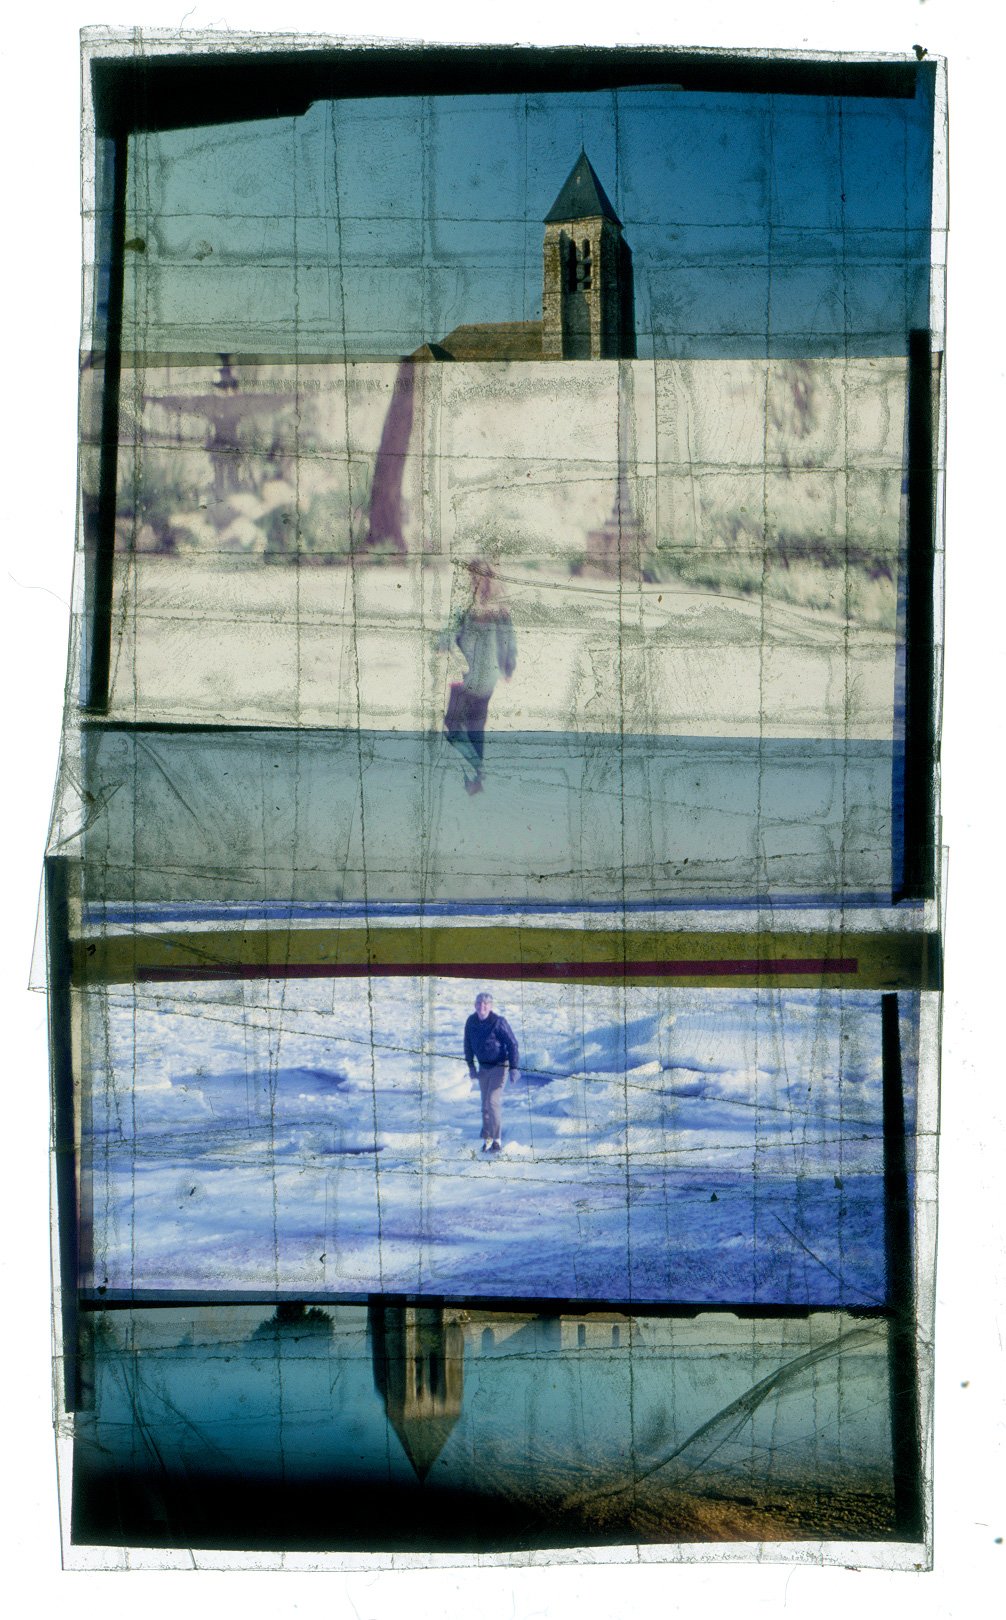 Alexandre Cruz Sesper, Never Been on the Snow, but Always Walked on Thin Glass, found negatives collage, 2018